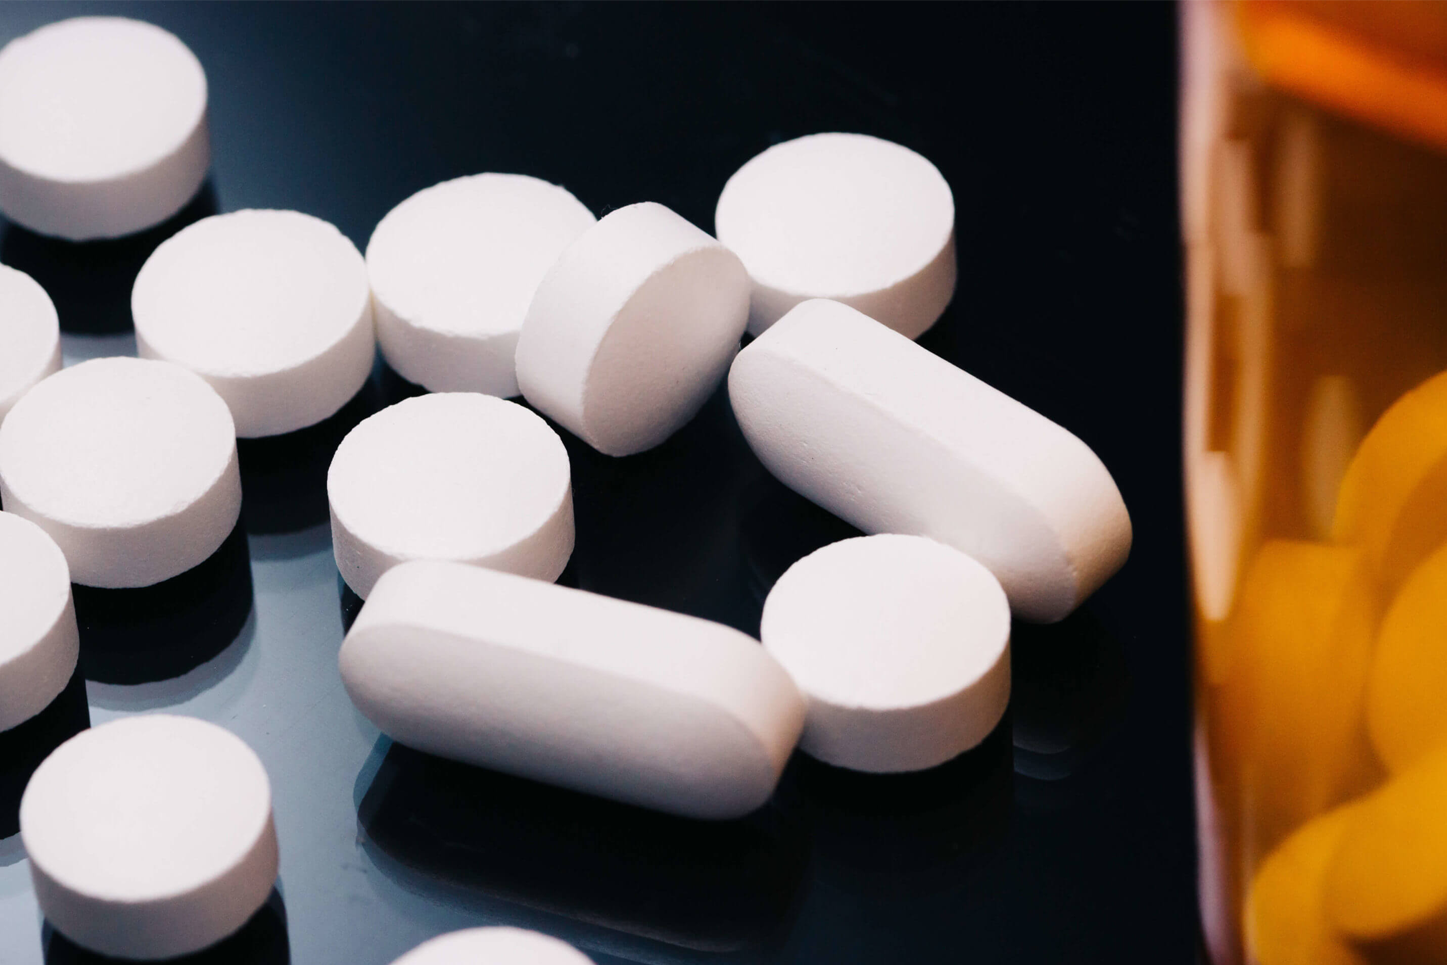 Is Inpatient or Outpatient Treatment Better For Adderall Addiction Treatment?